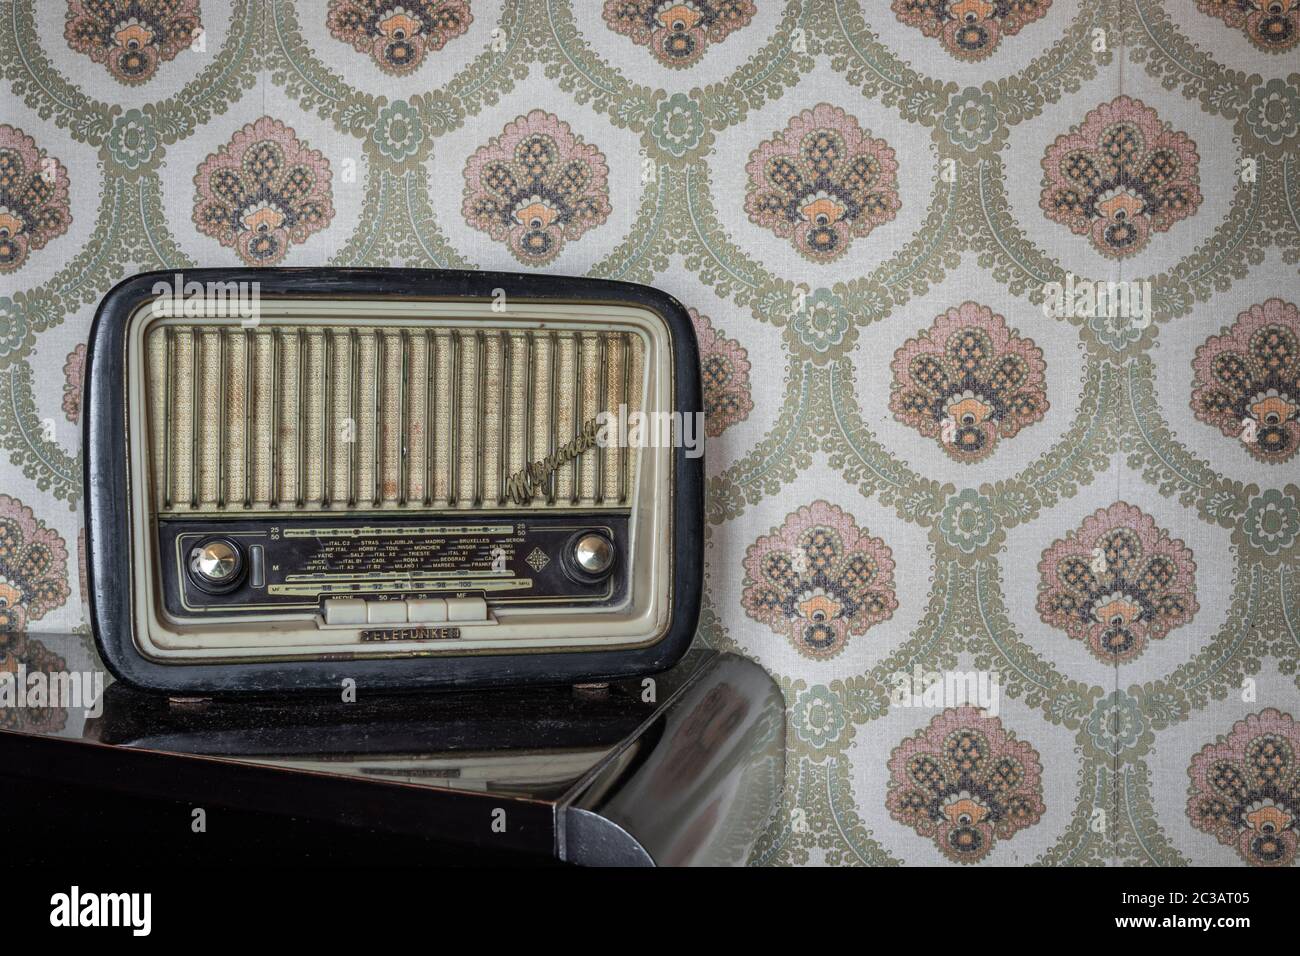 March 1, 2020 - Rome, Italy - Telefunken Mignonette, an old transistor radio,  with knobs and buttons for manual tuning. In the background a vintage wa  Stock Photo - Alamy